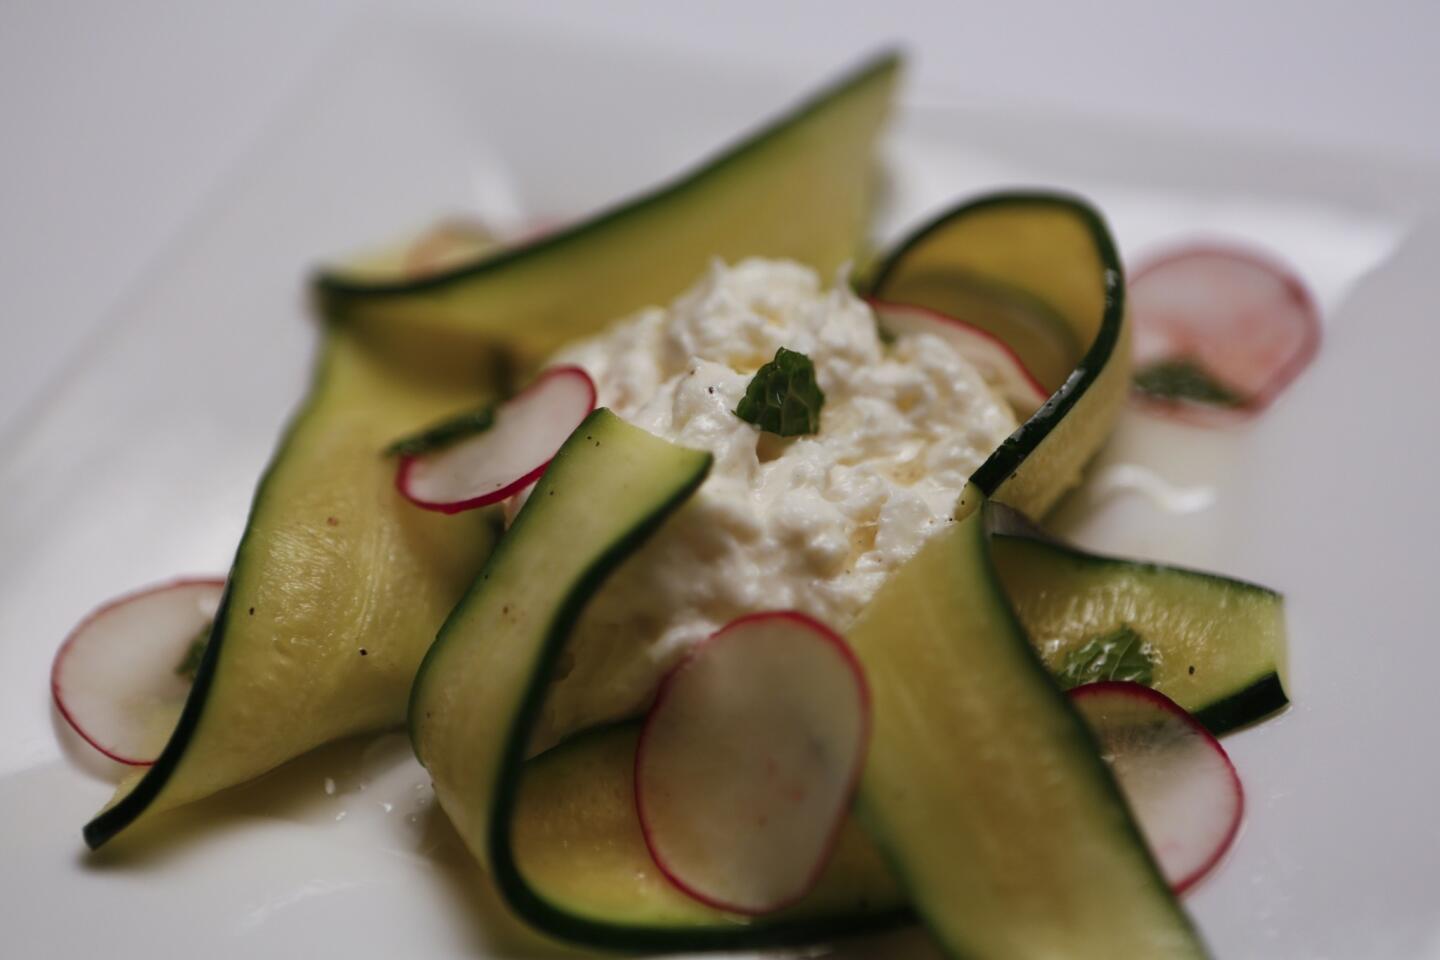 Shaved zucchini, radishes and mint